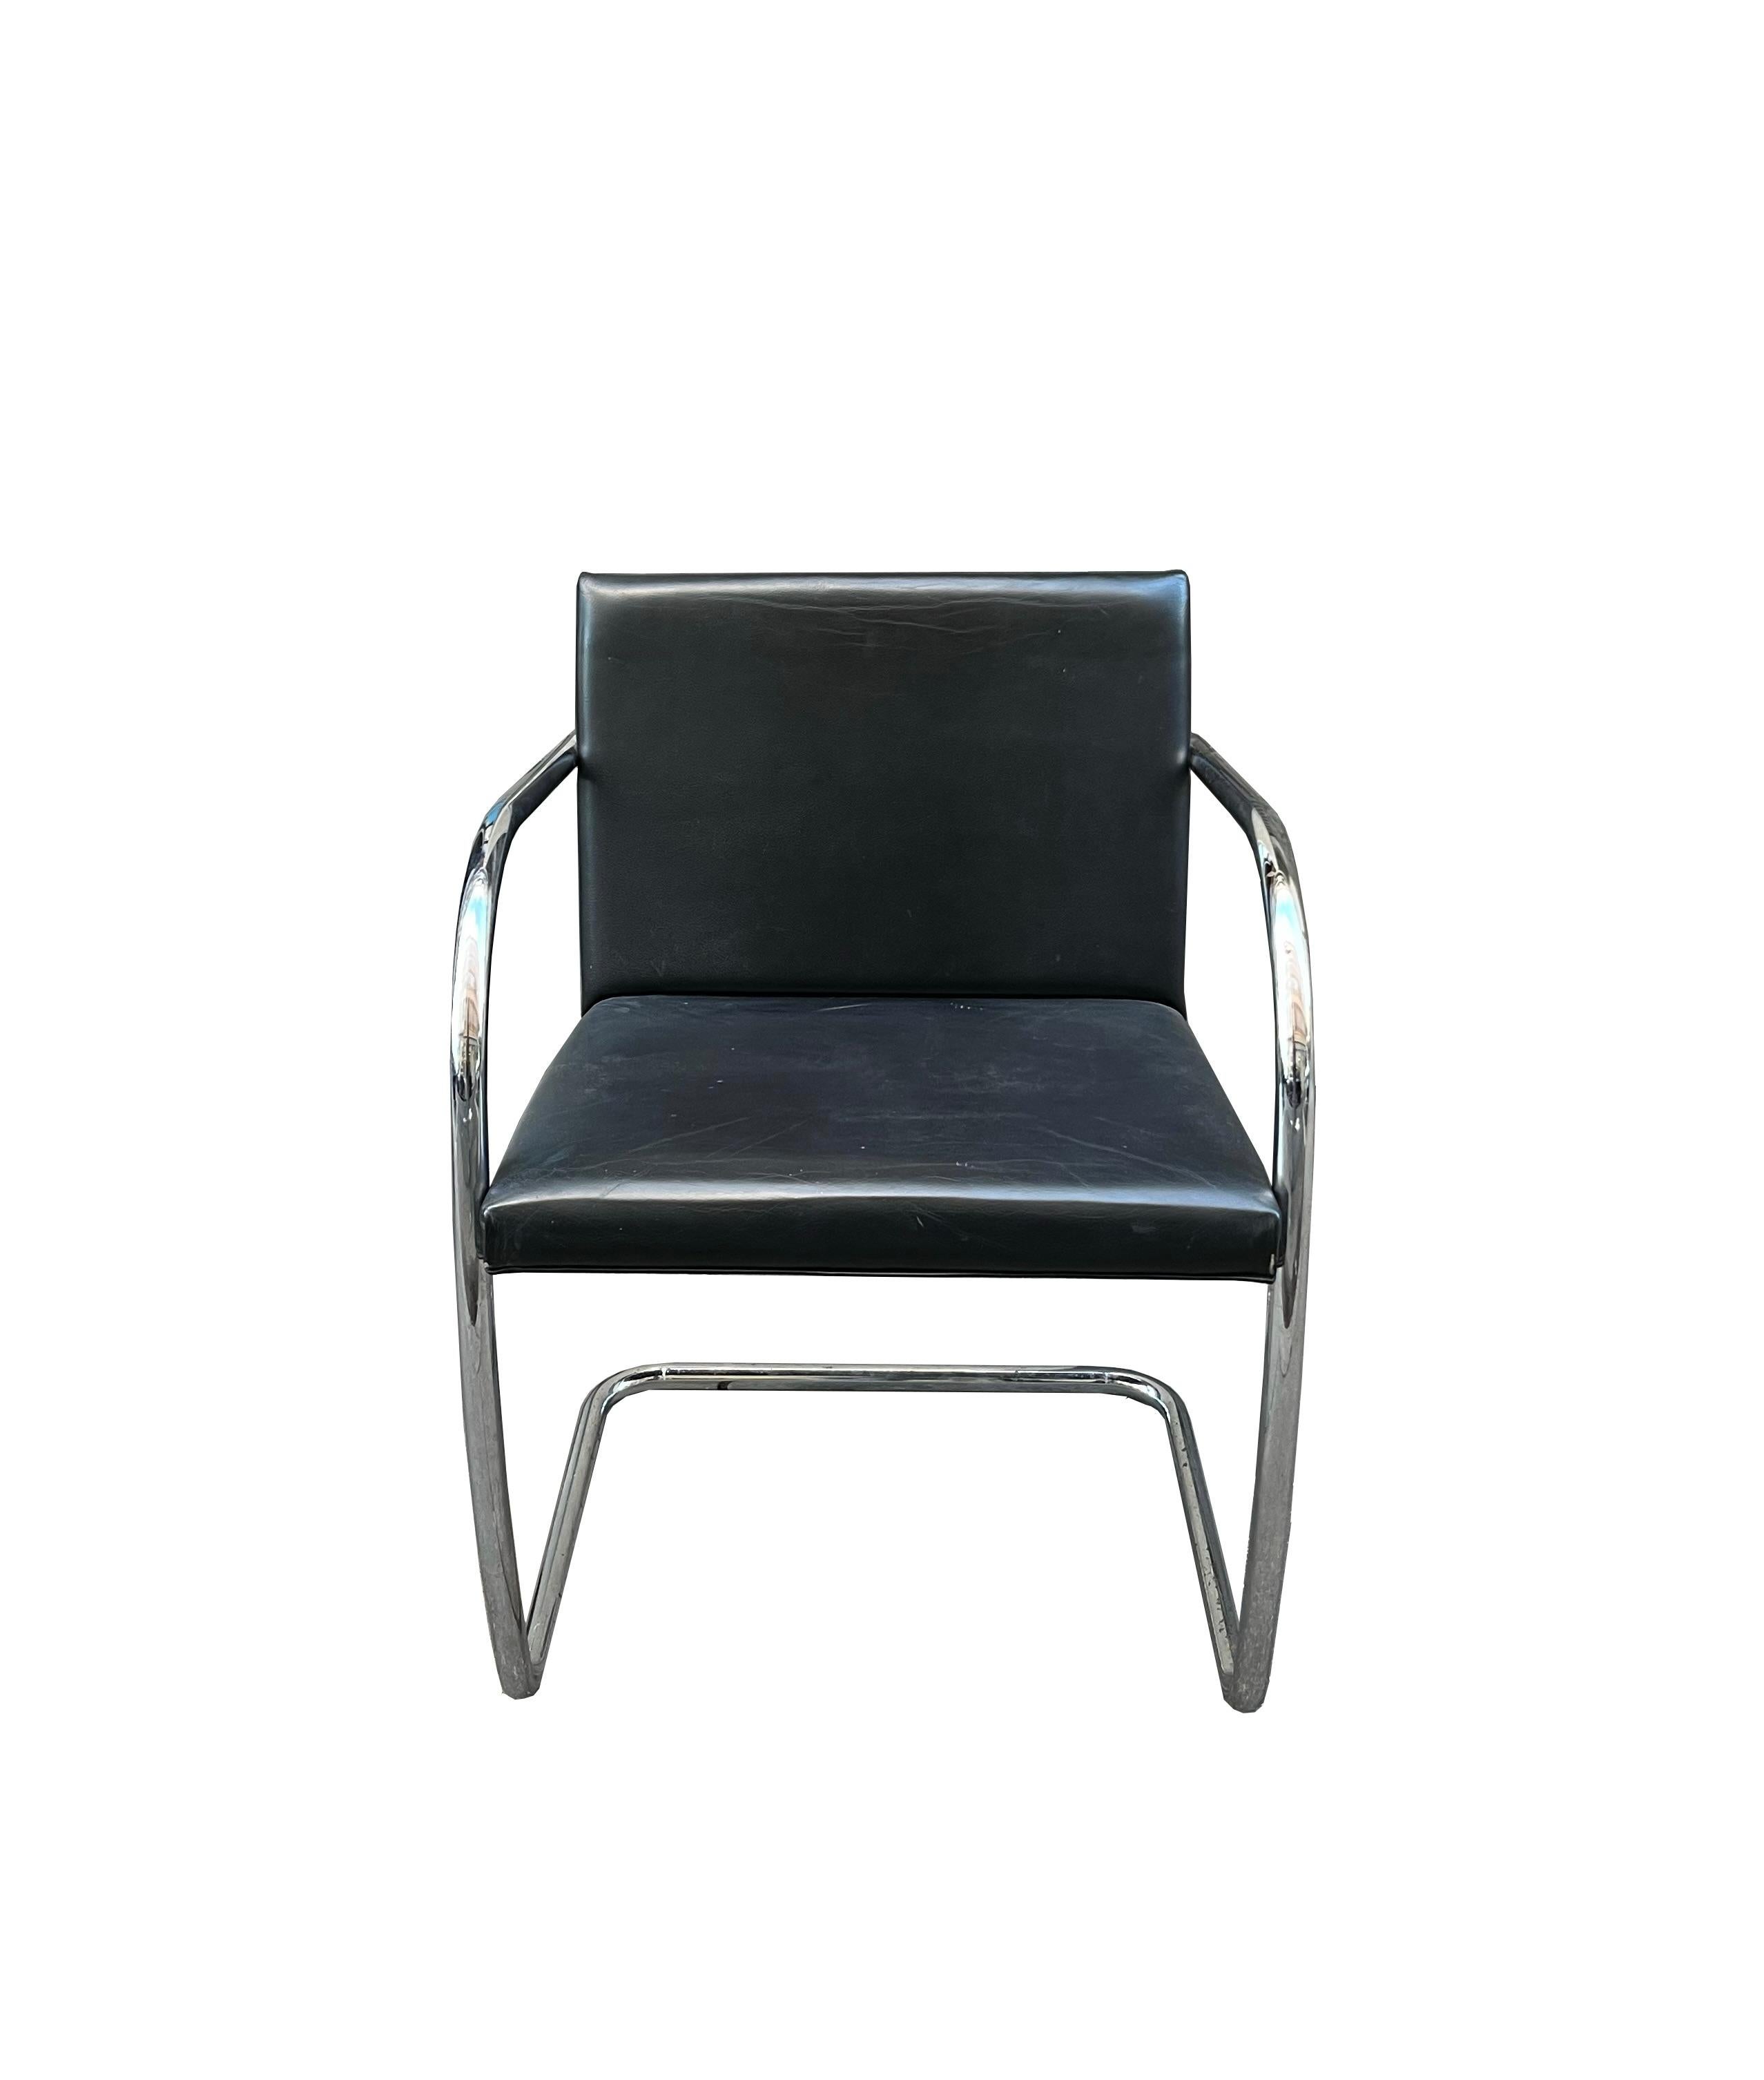 American Six Ludwig Mies van der Rohe Brno Tubular Chairs/Desk Chairs for Knoll, c1970 For Sale